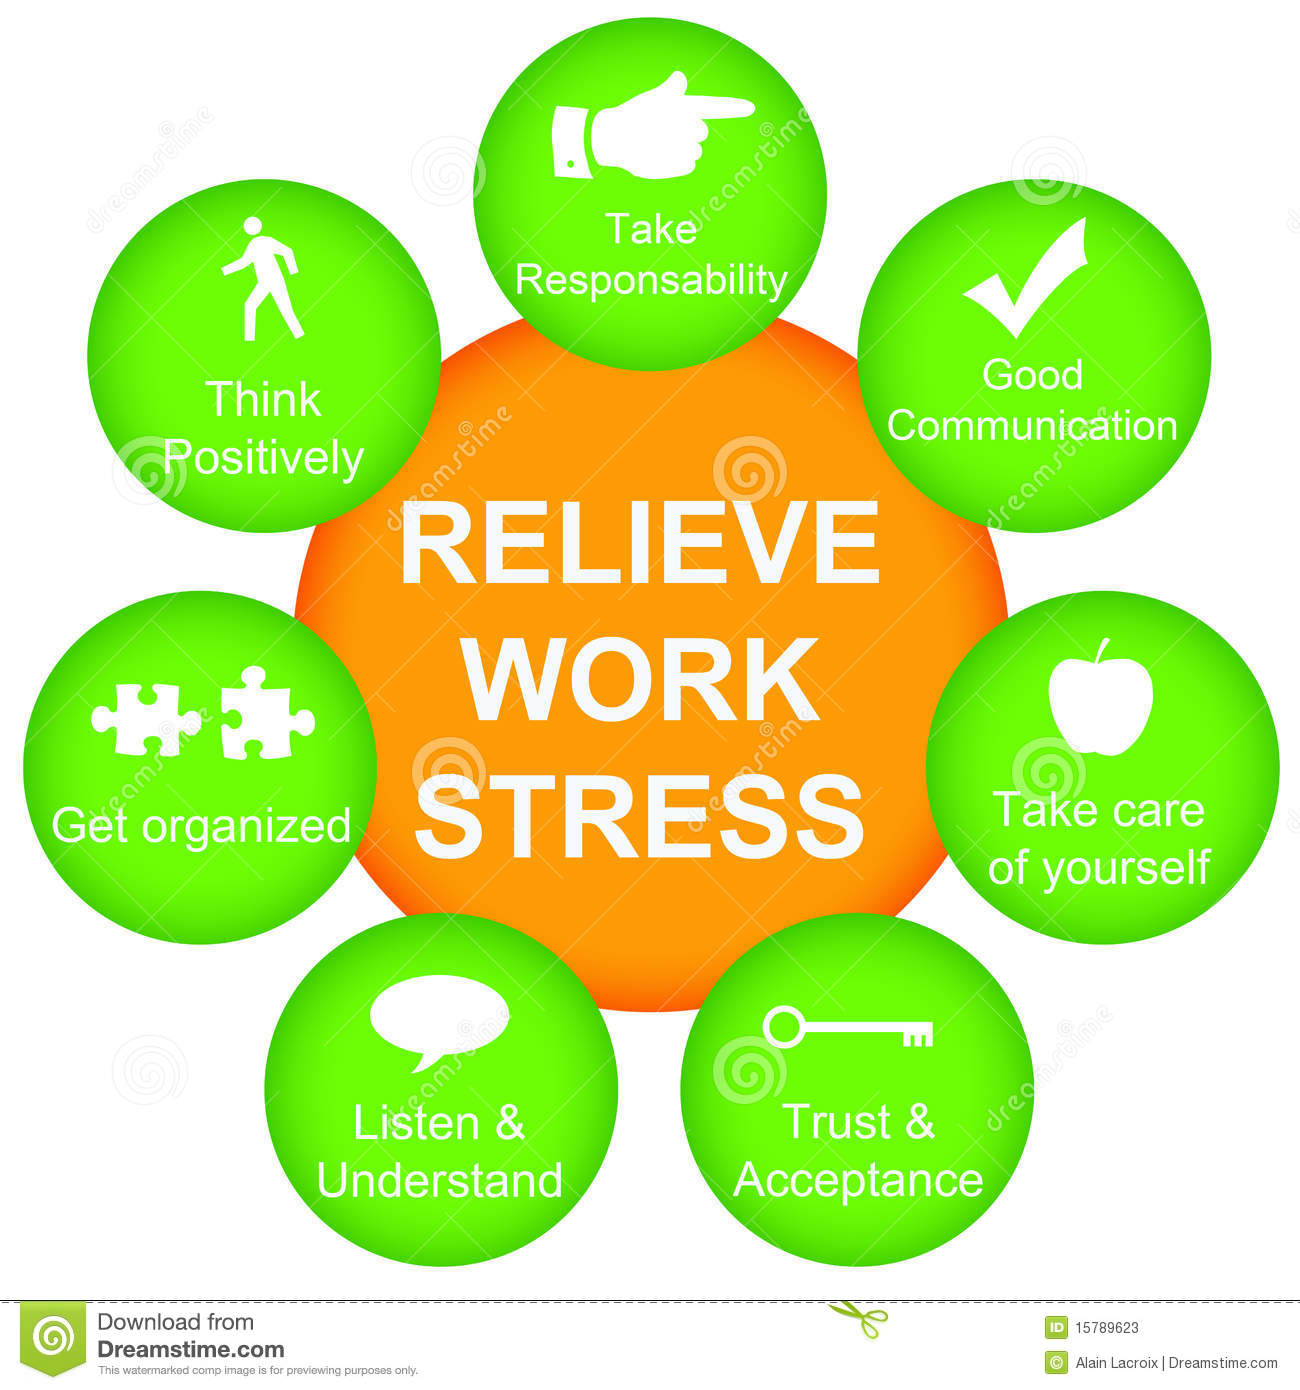 Relieving Work Stress By Focusing On Certain Topics